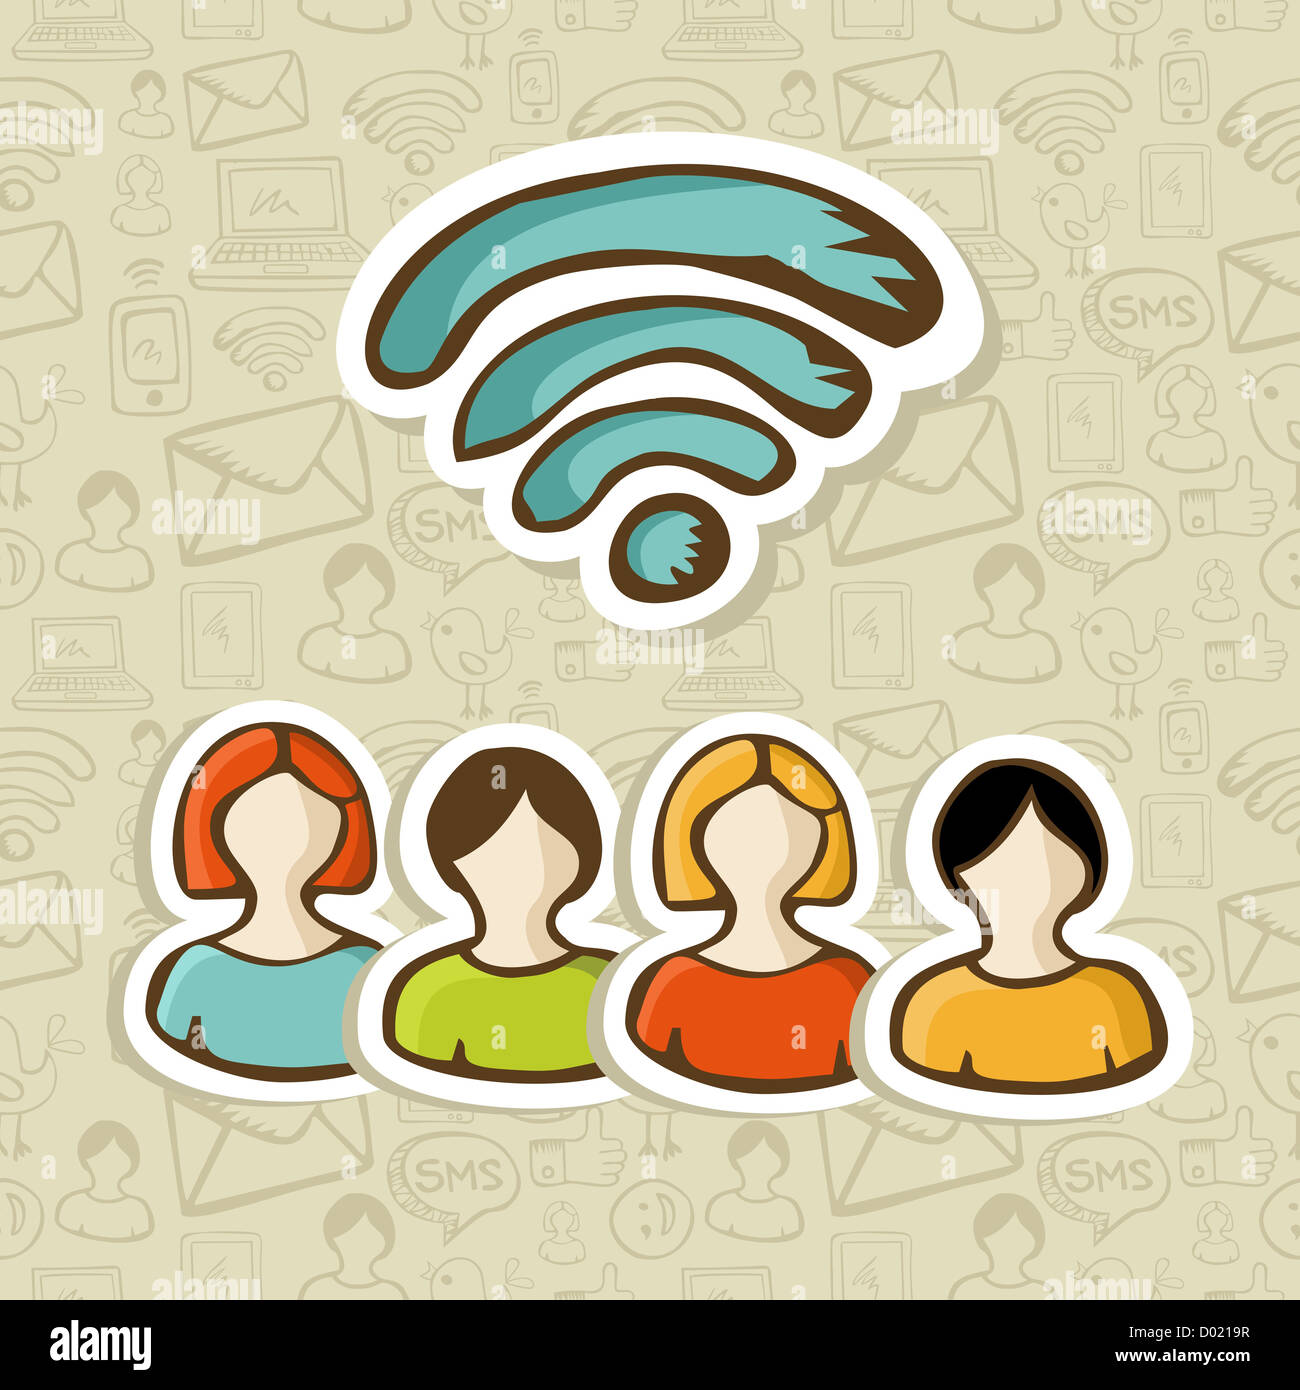 Diversity people connection via social networks RSS feed. Vector illustration layered for easy manipulation and custom coloring. Stock Photo